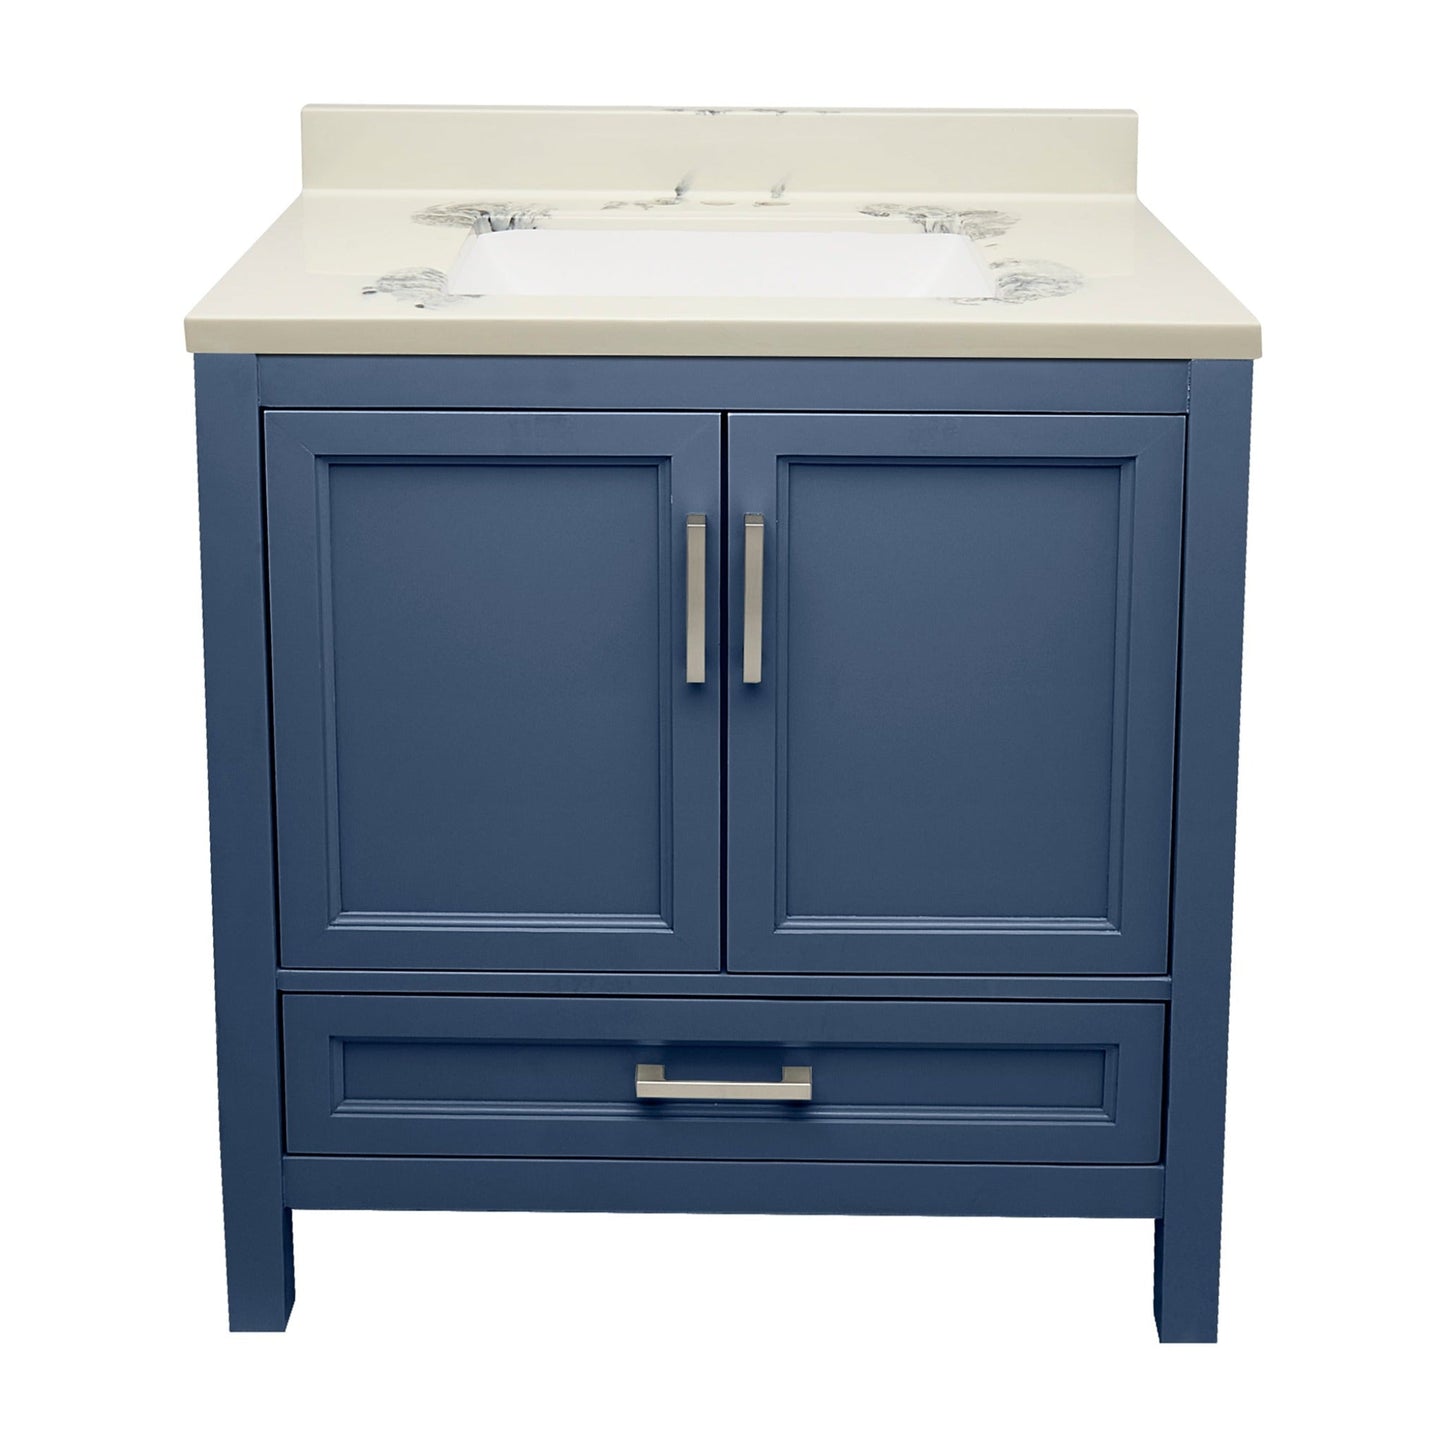 Ella’s Bubbles Nevado 31" Navy Blue Bathroom Vanity With Carrara White Cultured Marble Top With Backsplash and Sink